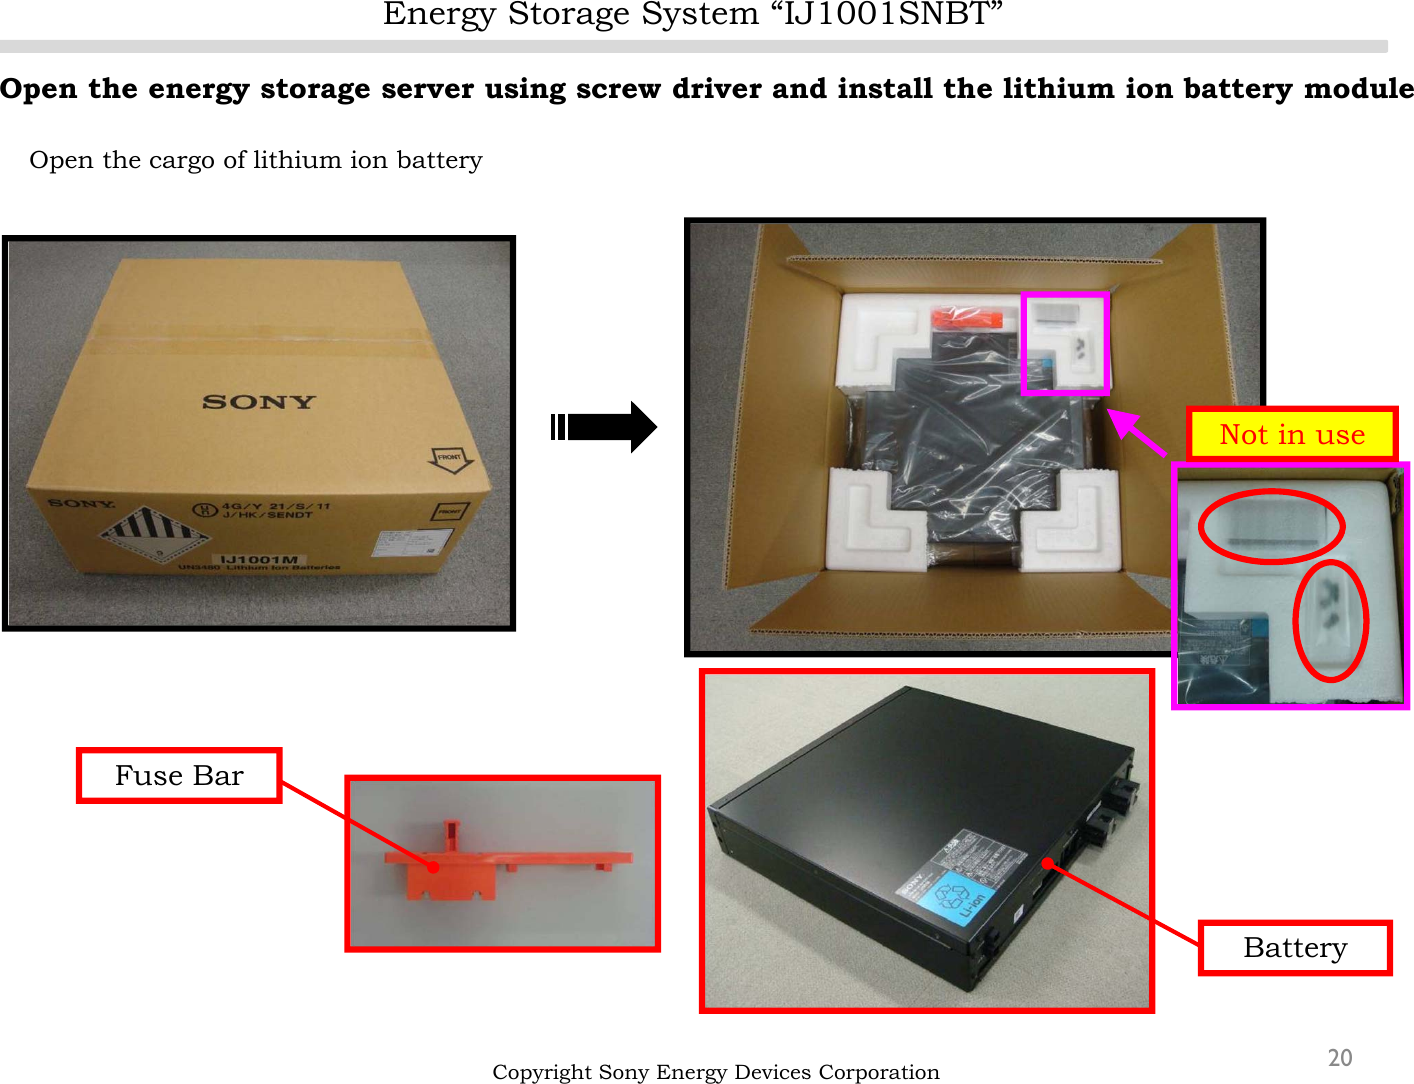 Energy Storage System “IJ1001SNBT”20Open the energy storage server using screw driver and install the lithium ion battery moduleOpen the cargo of lithium ion batteryCopyright Sony Energy Devices CorporationNot in useFuse BarBattery